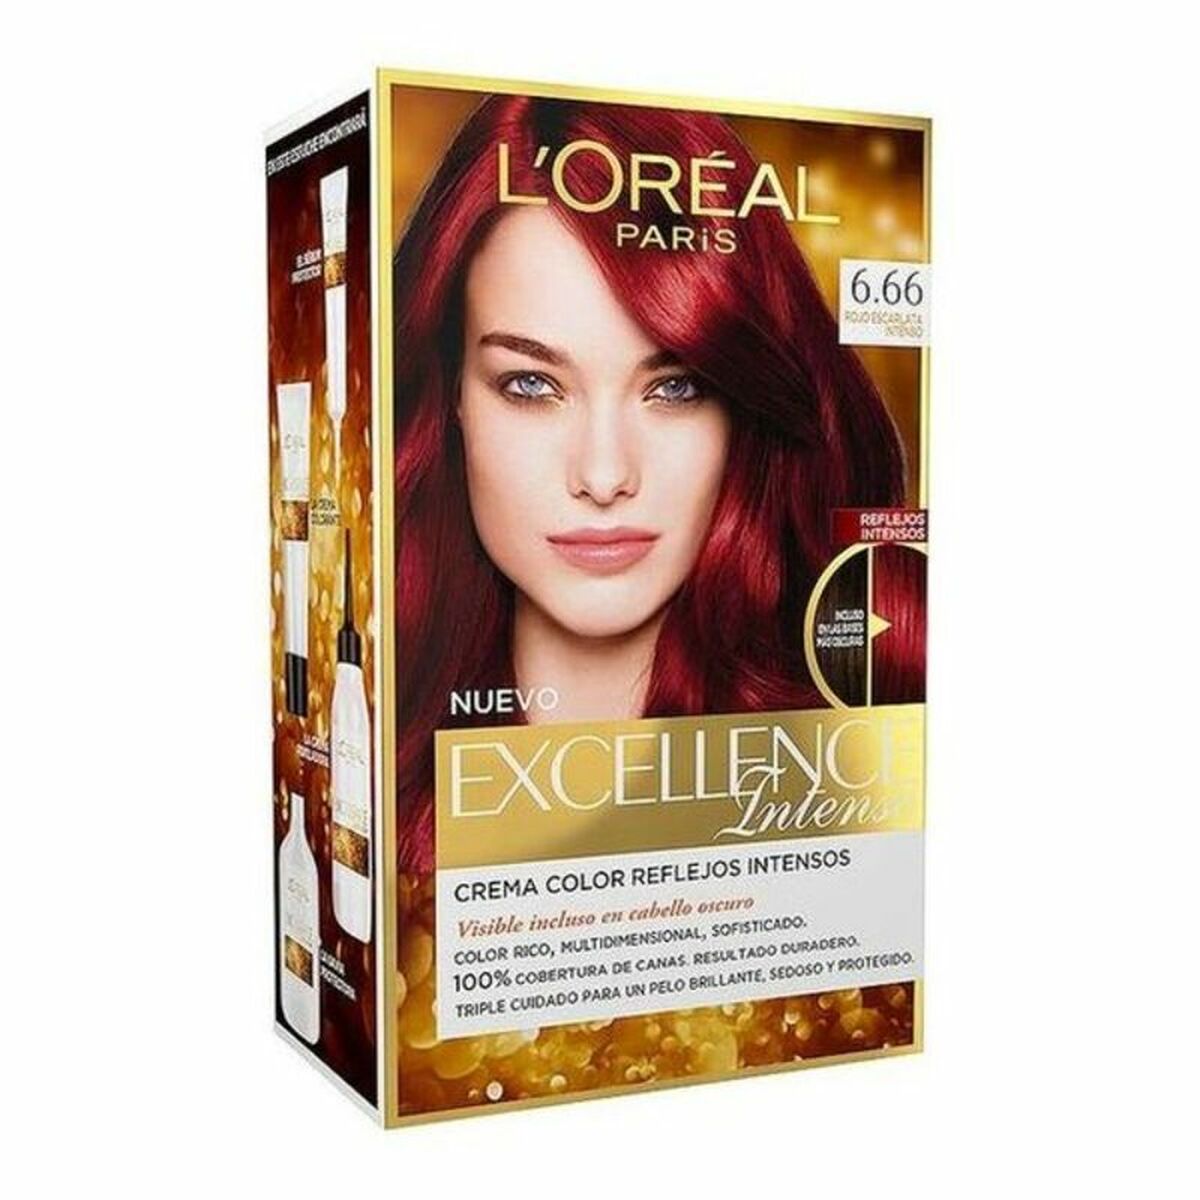 Permanent Dye Excellence Intense L'Oreal Make Up Intense scarlet red